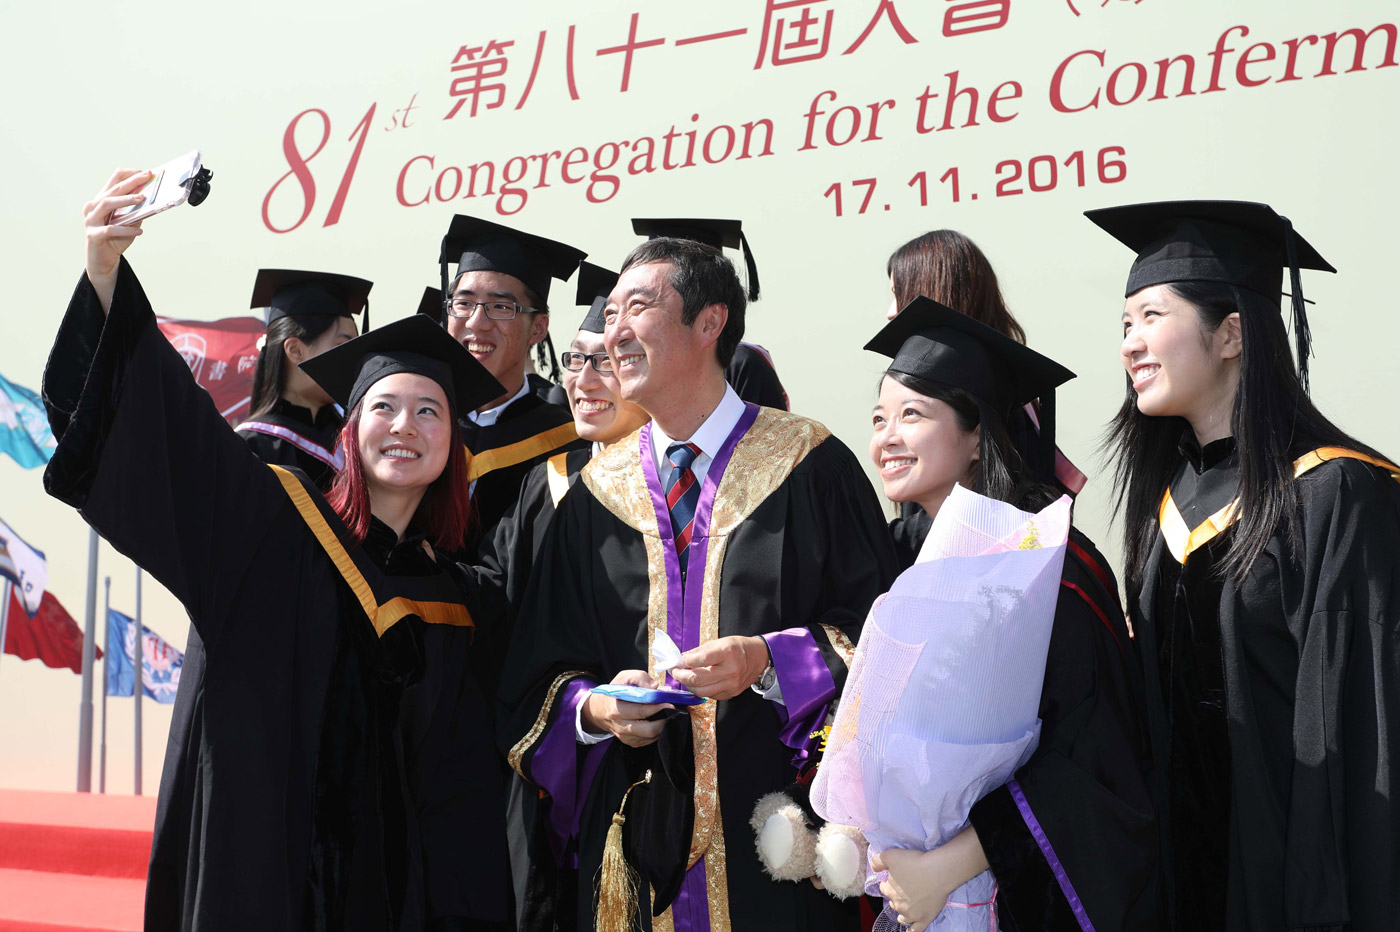 81st Congregation for the Conferment of Degrees